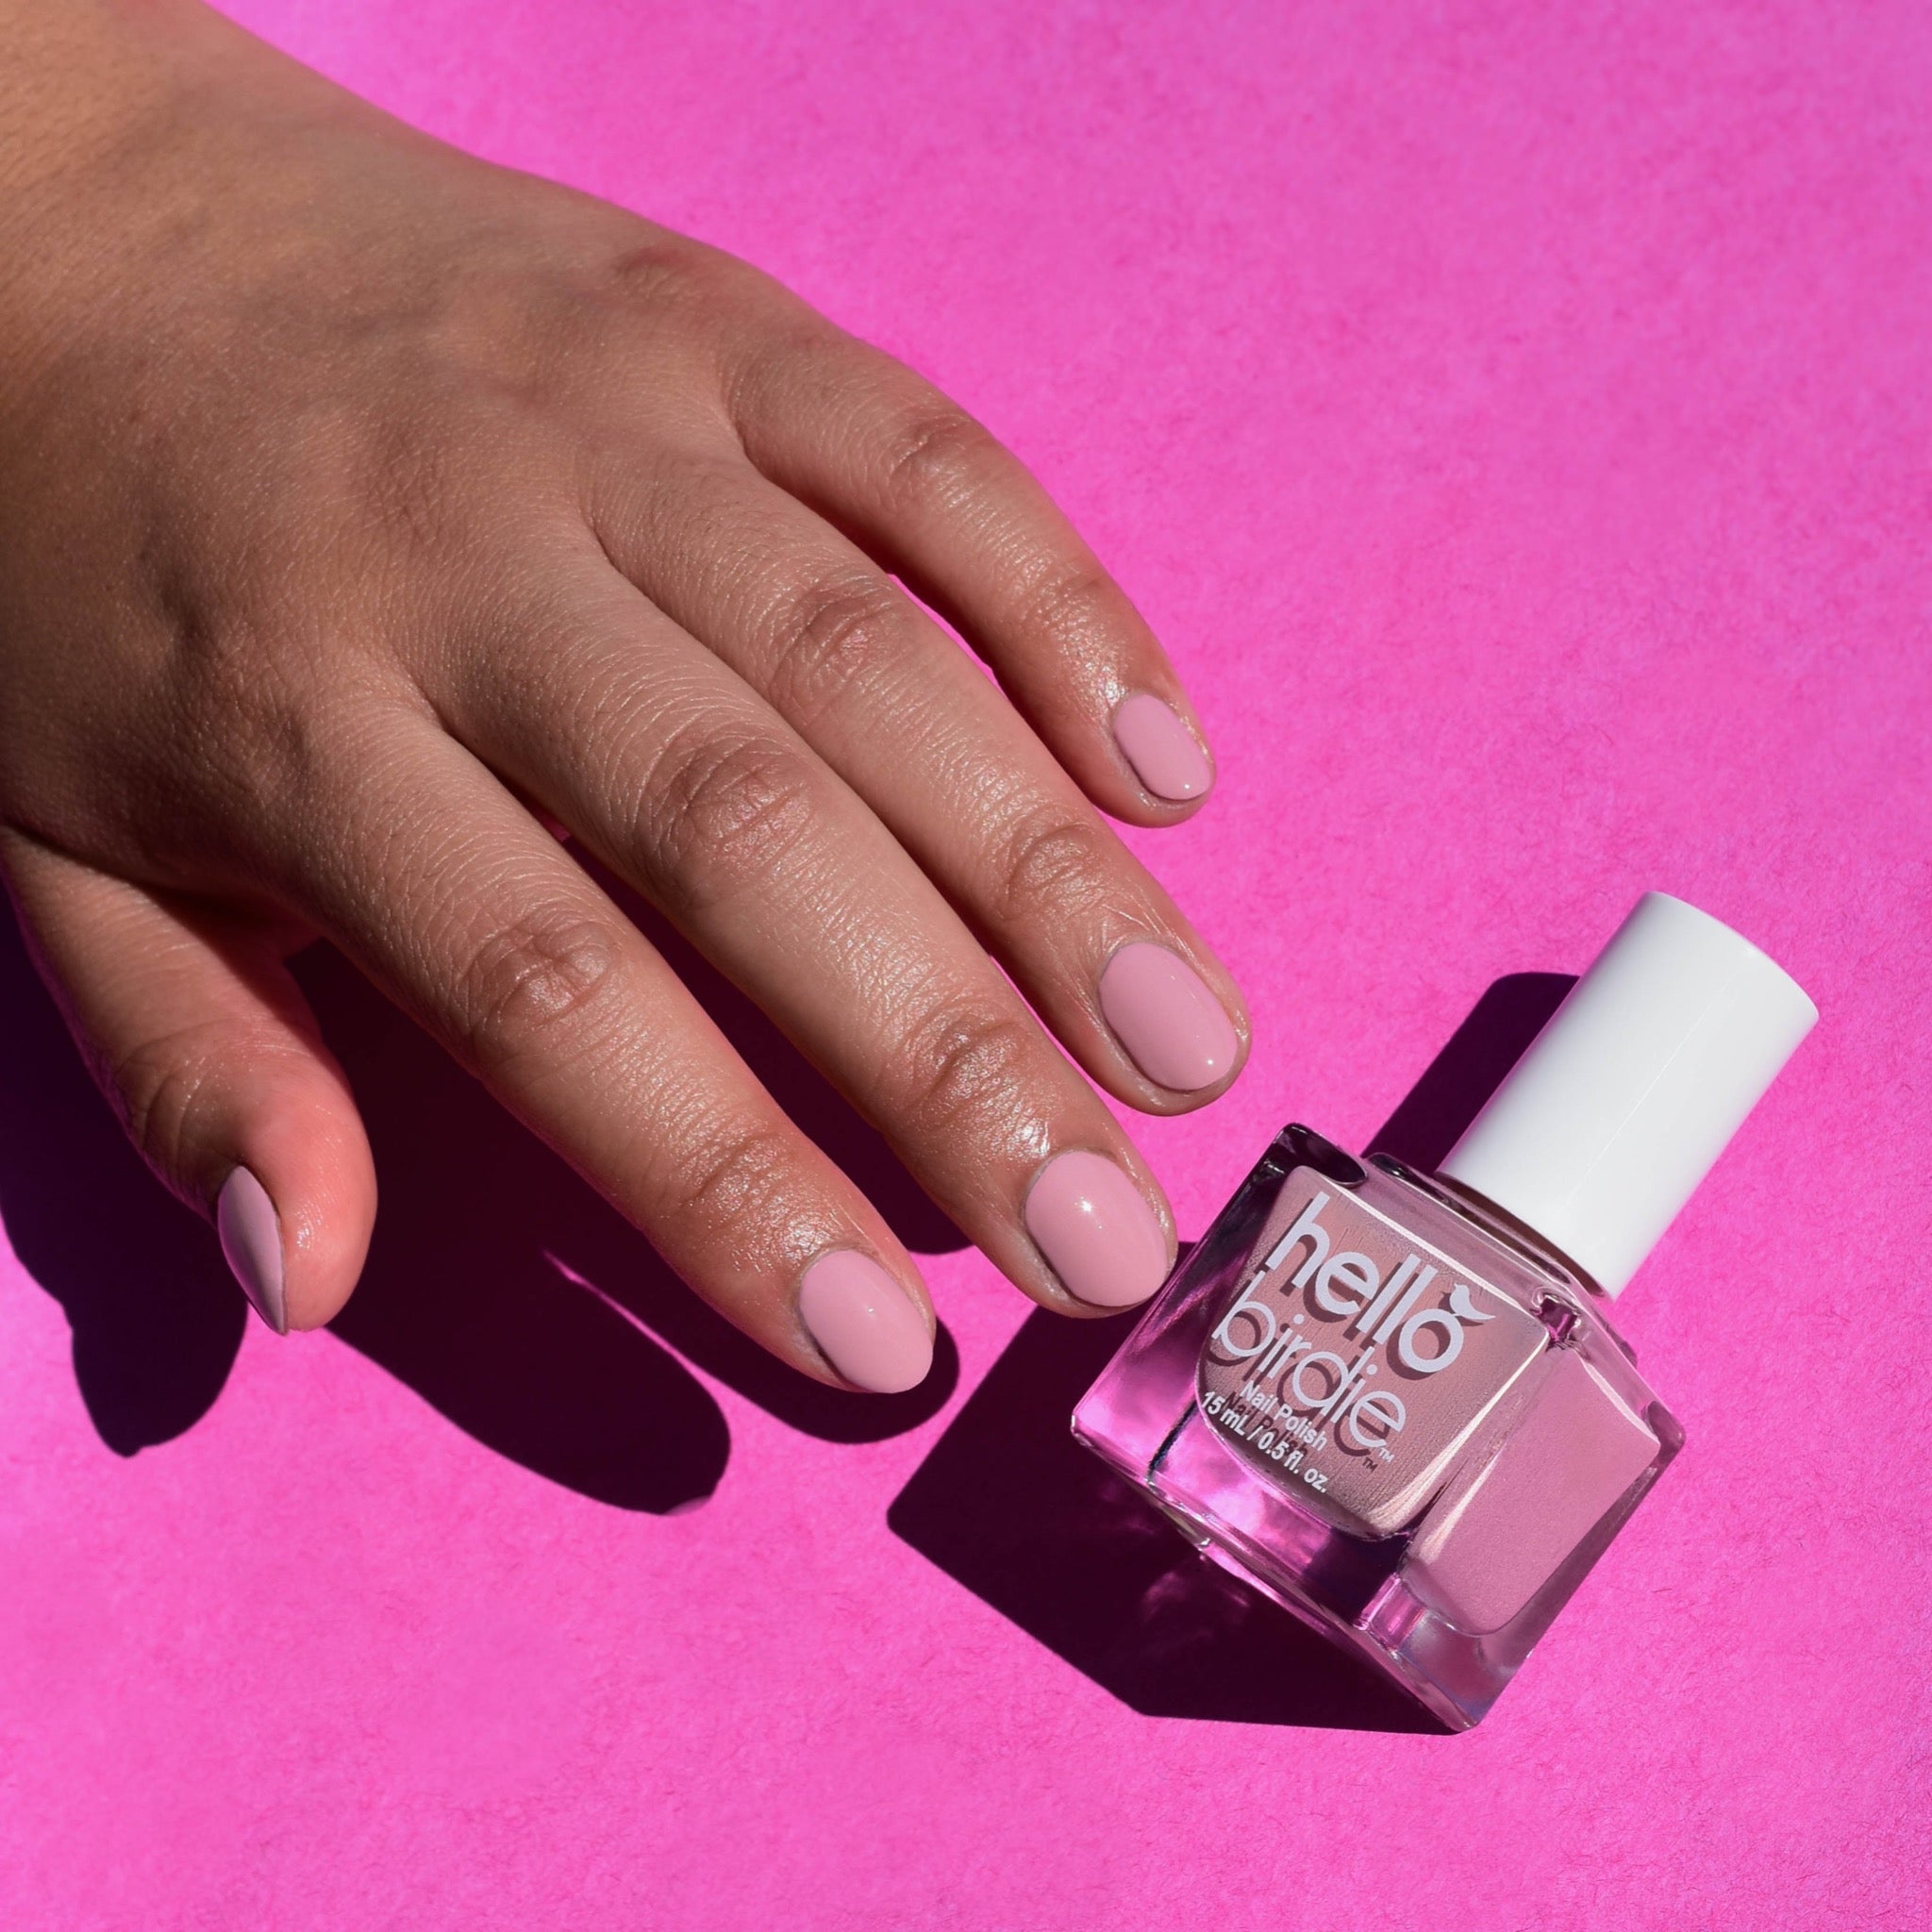 A model's mid toned hand barely touching a bottle of Tippi nail polish from Hello Birdie which is a rosy mauve hue. They are illuminated with a hard light against a bright pink paper background.